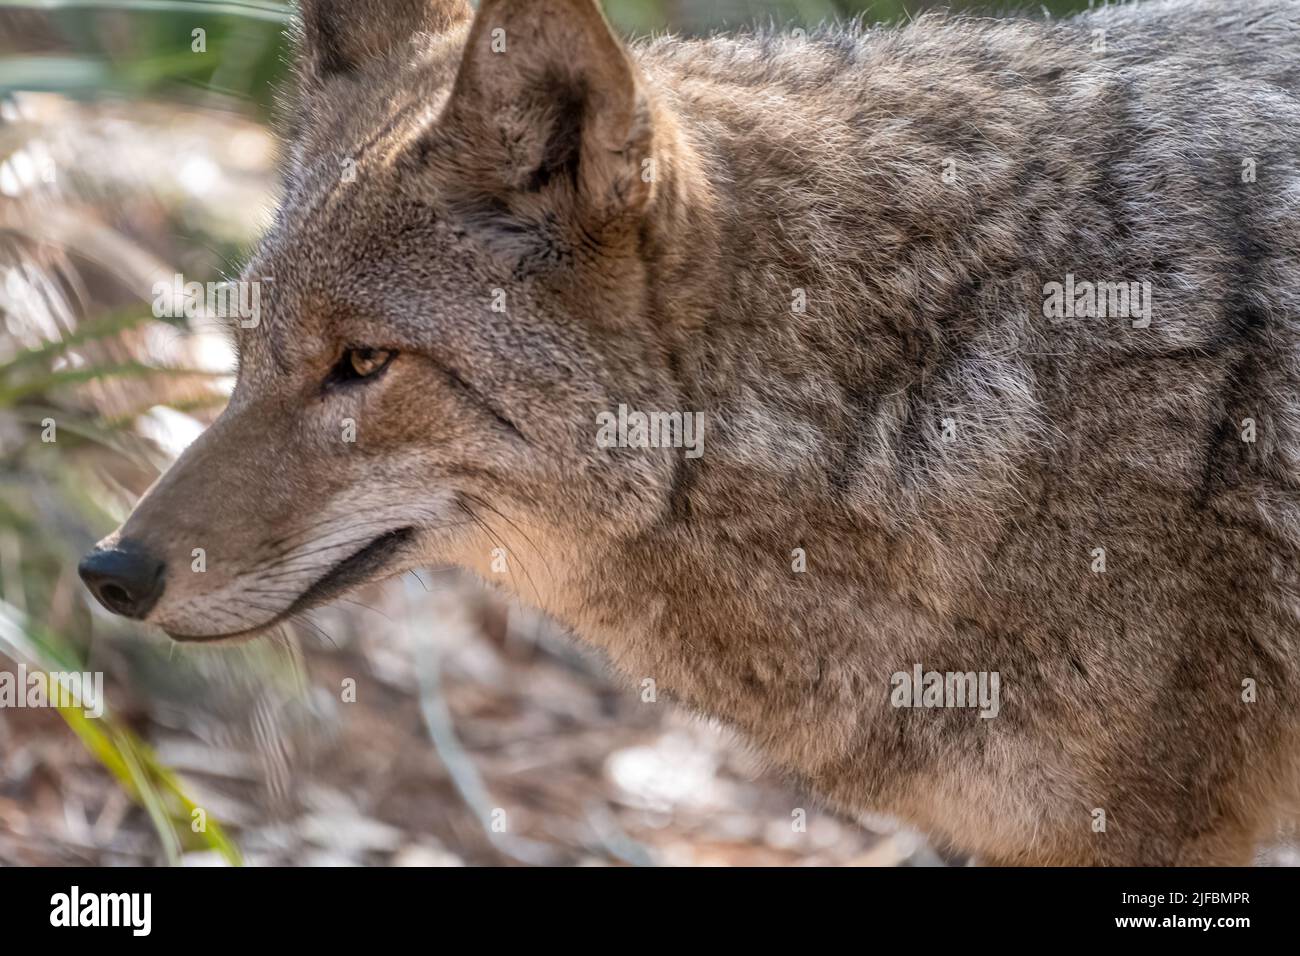 Coyote (Canis latrans thamnos) at Jacksonville Zoo and Gardens in Jacksonville, Florida. (USA) Stock Photo